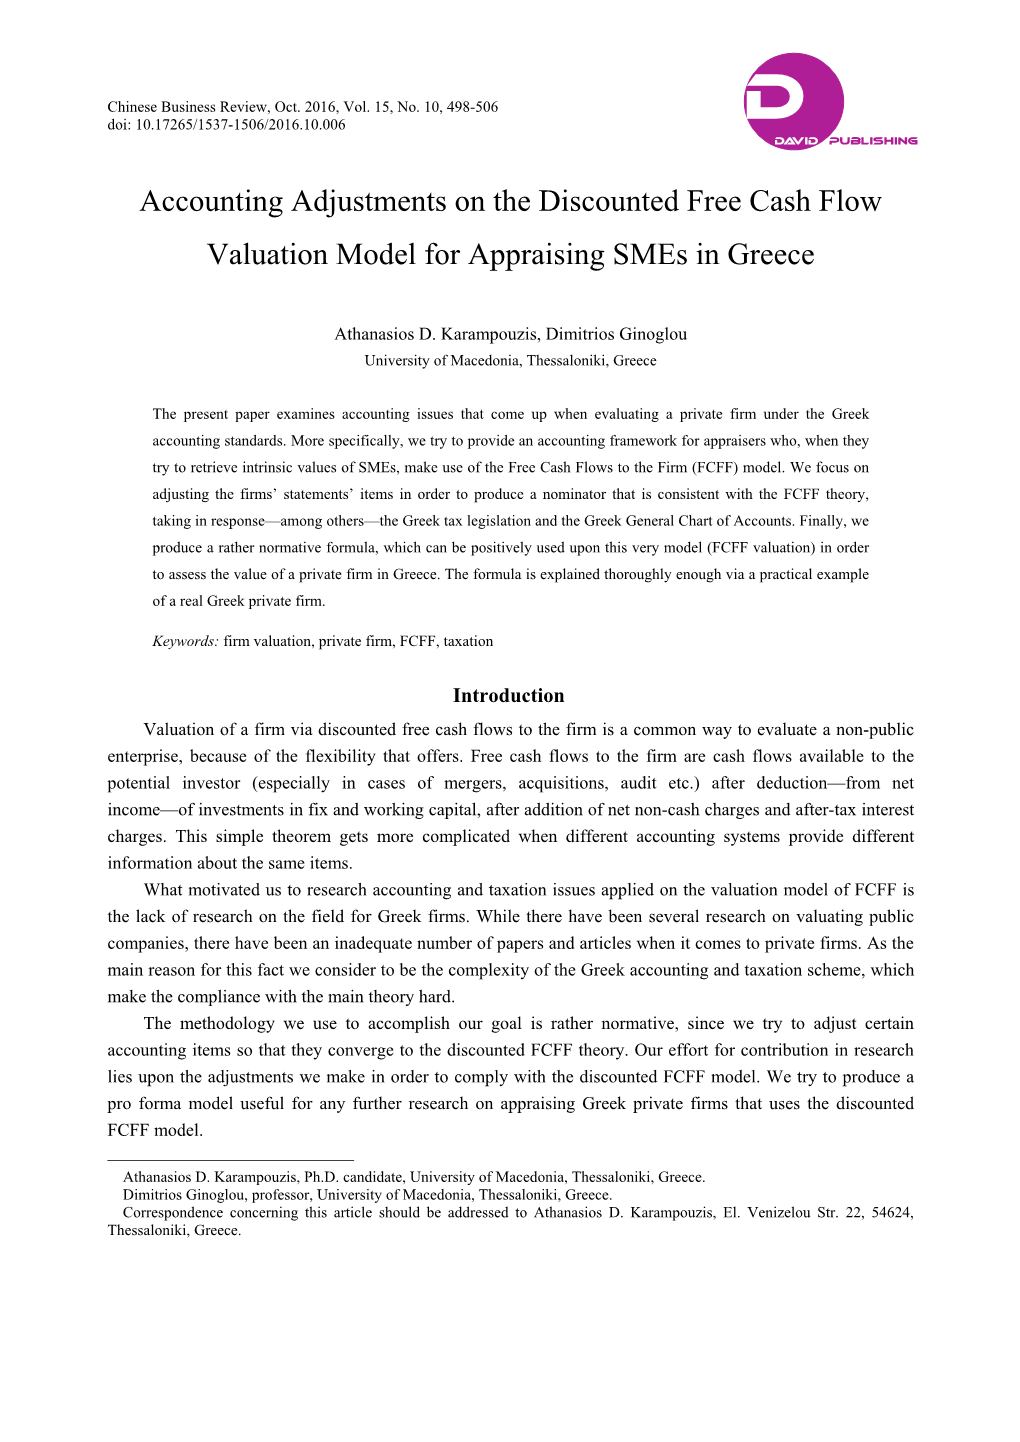 Accounting Adjustments on the Discounted Free Cash Flow Valuation Model for Appraising Smes in Greece